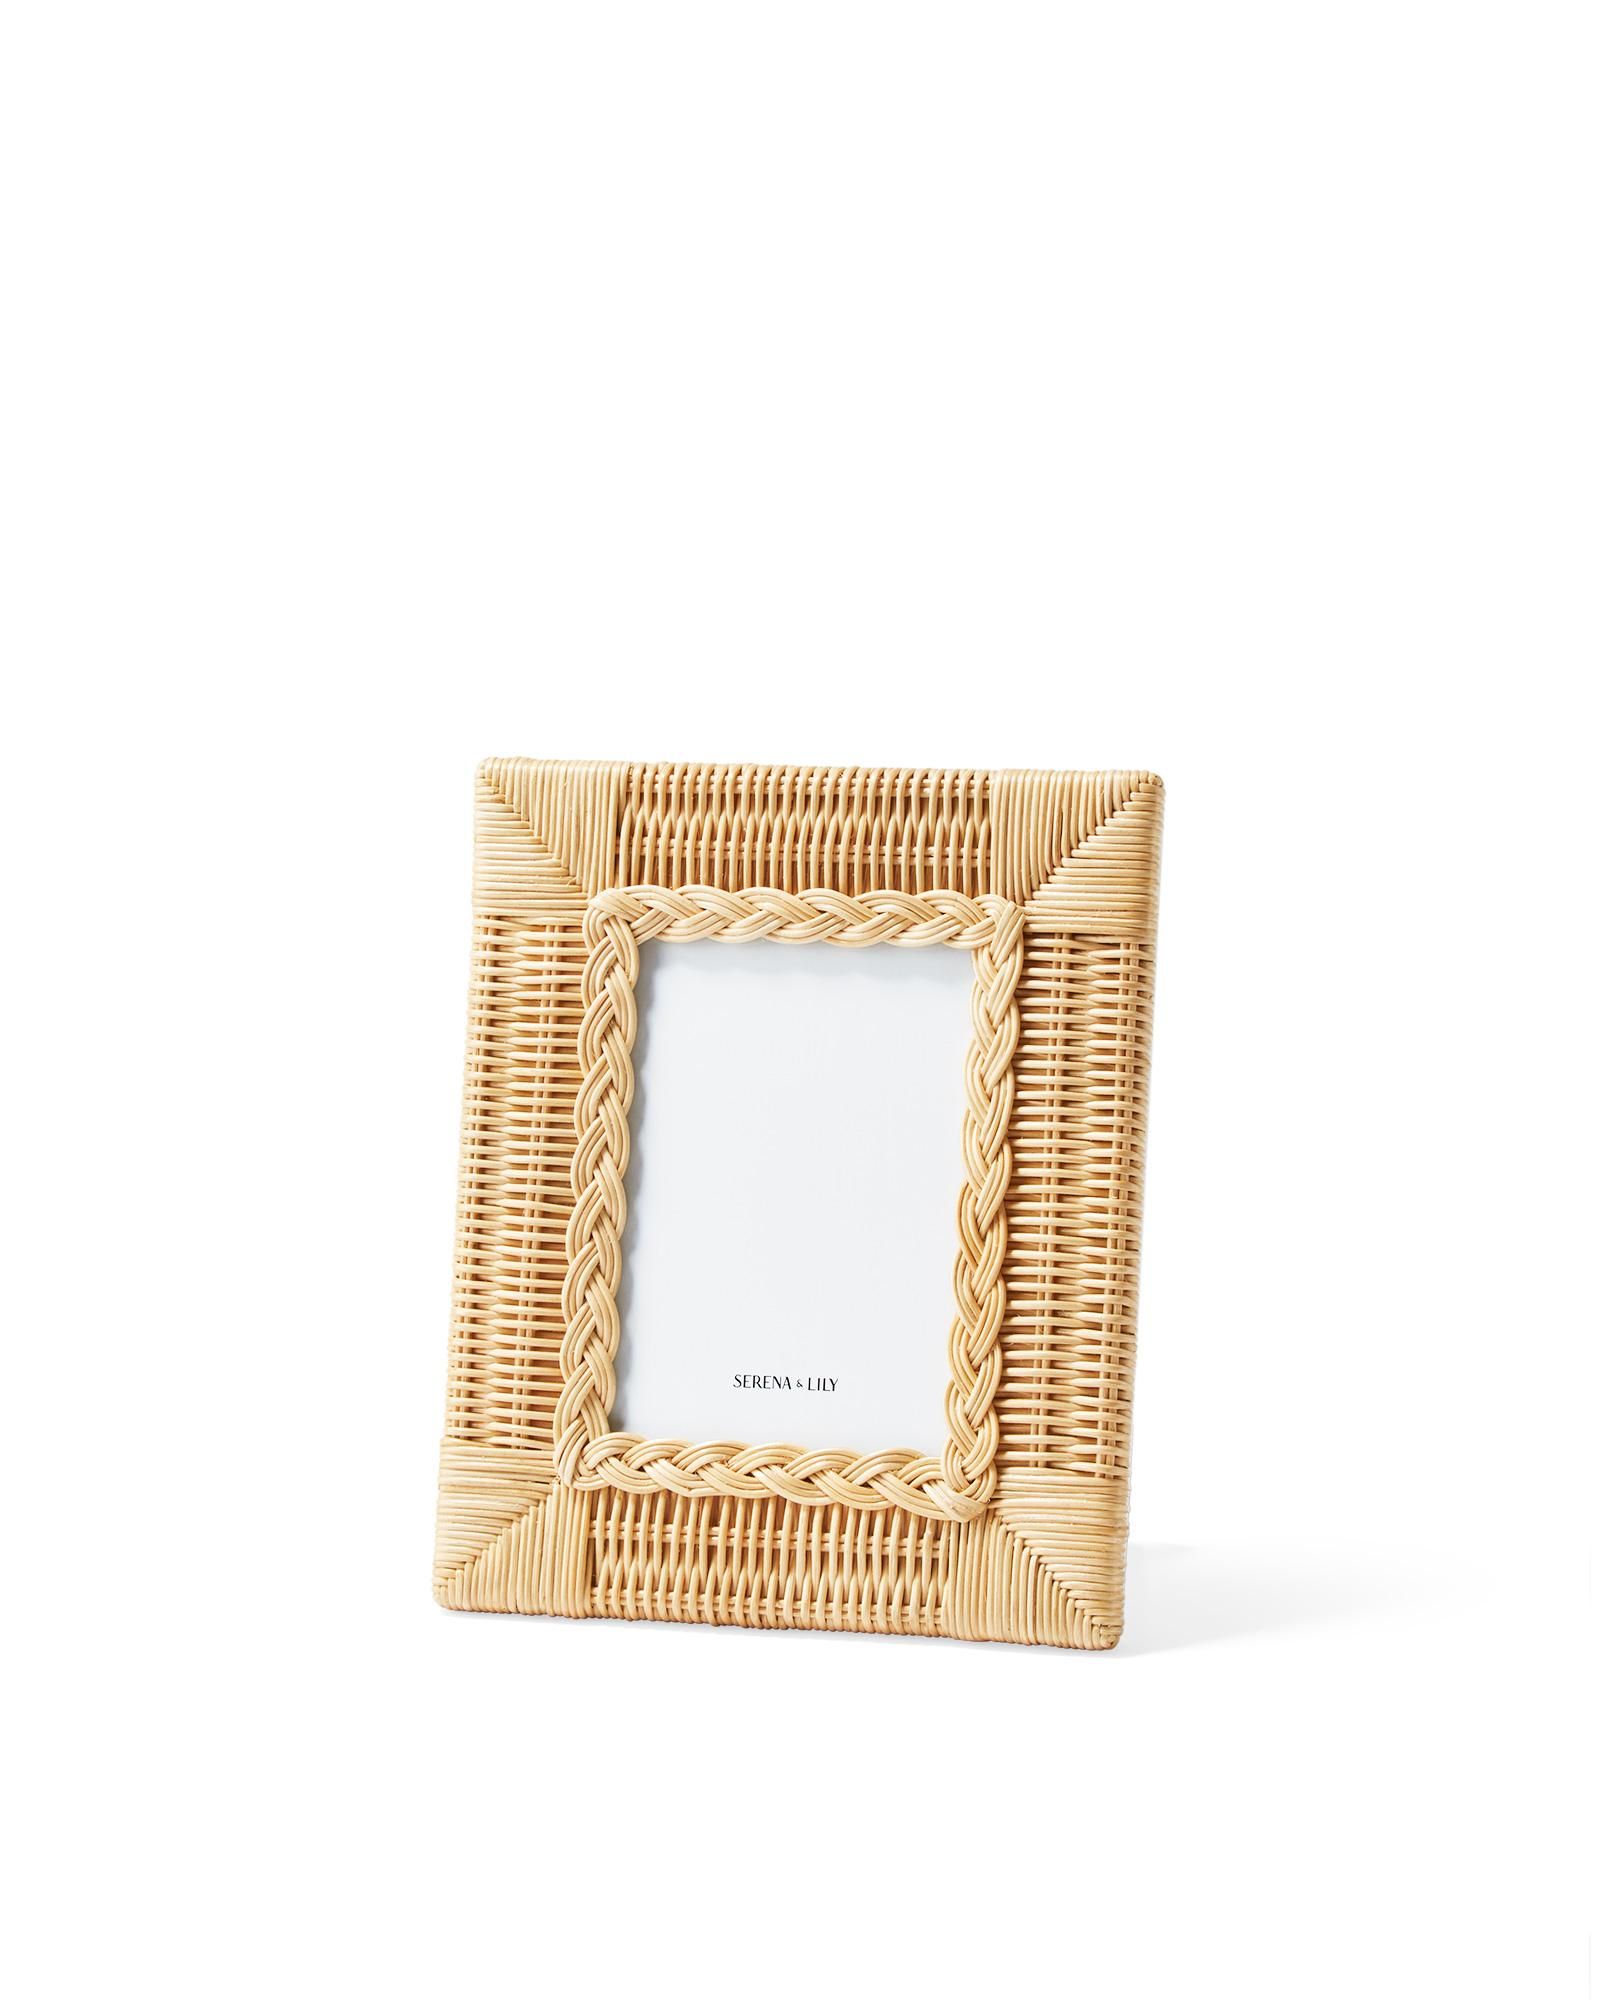 Braided Wicker Frame | Serena and Lily